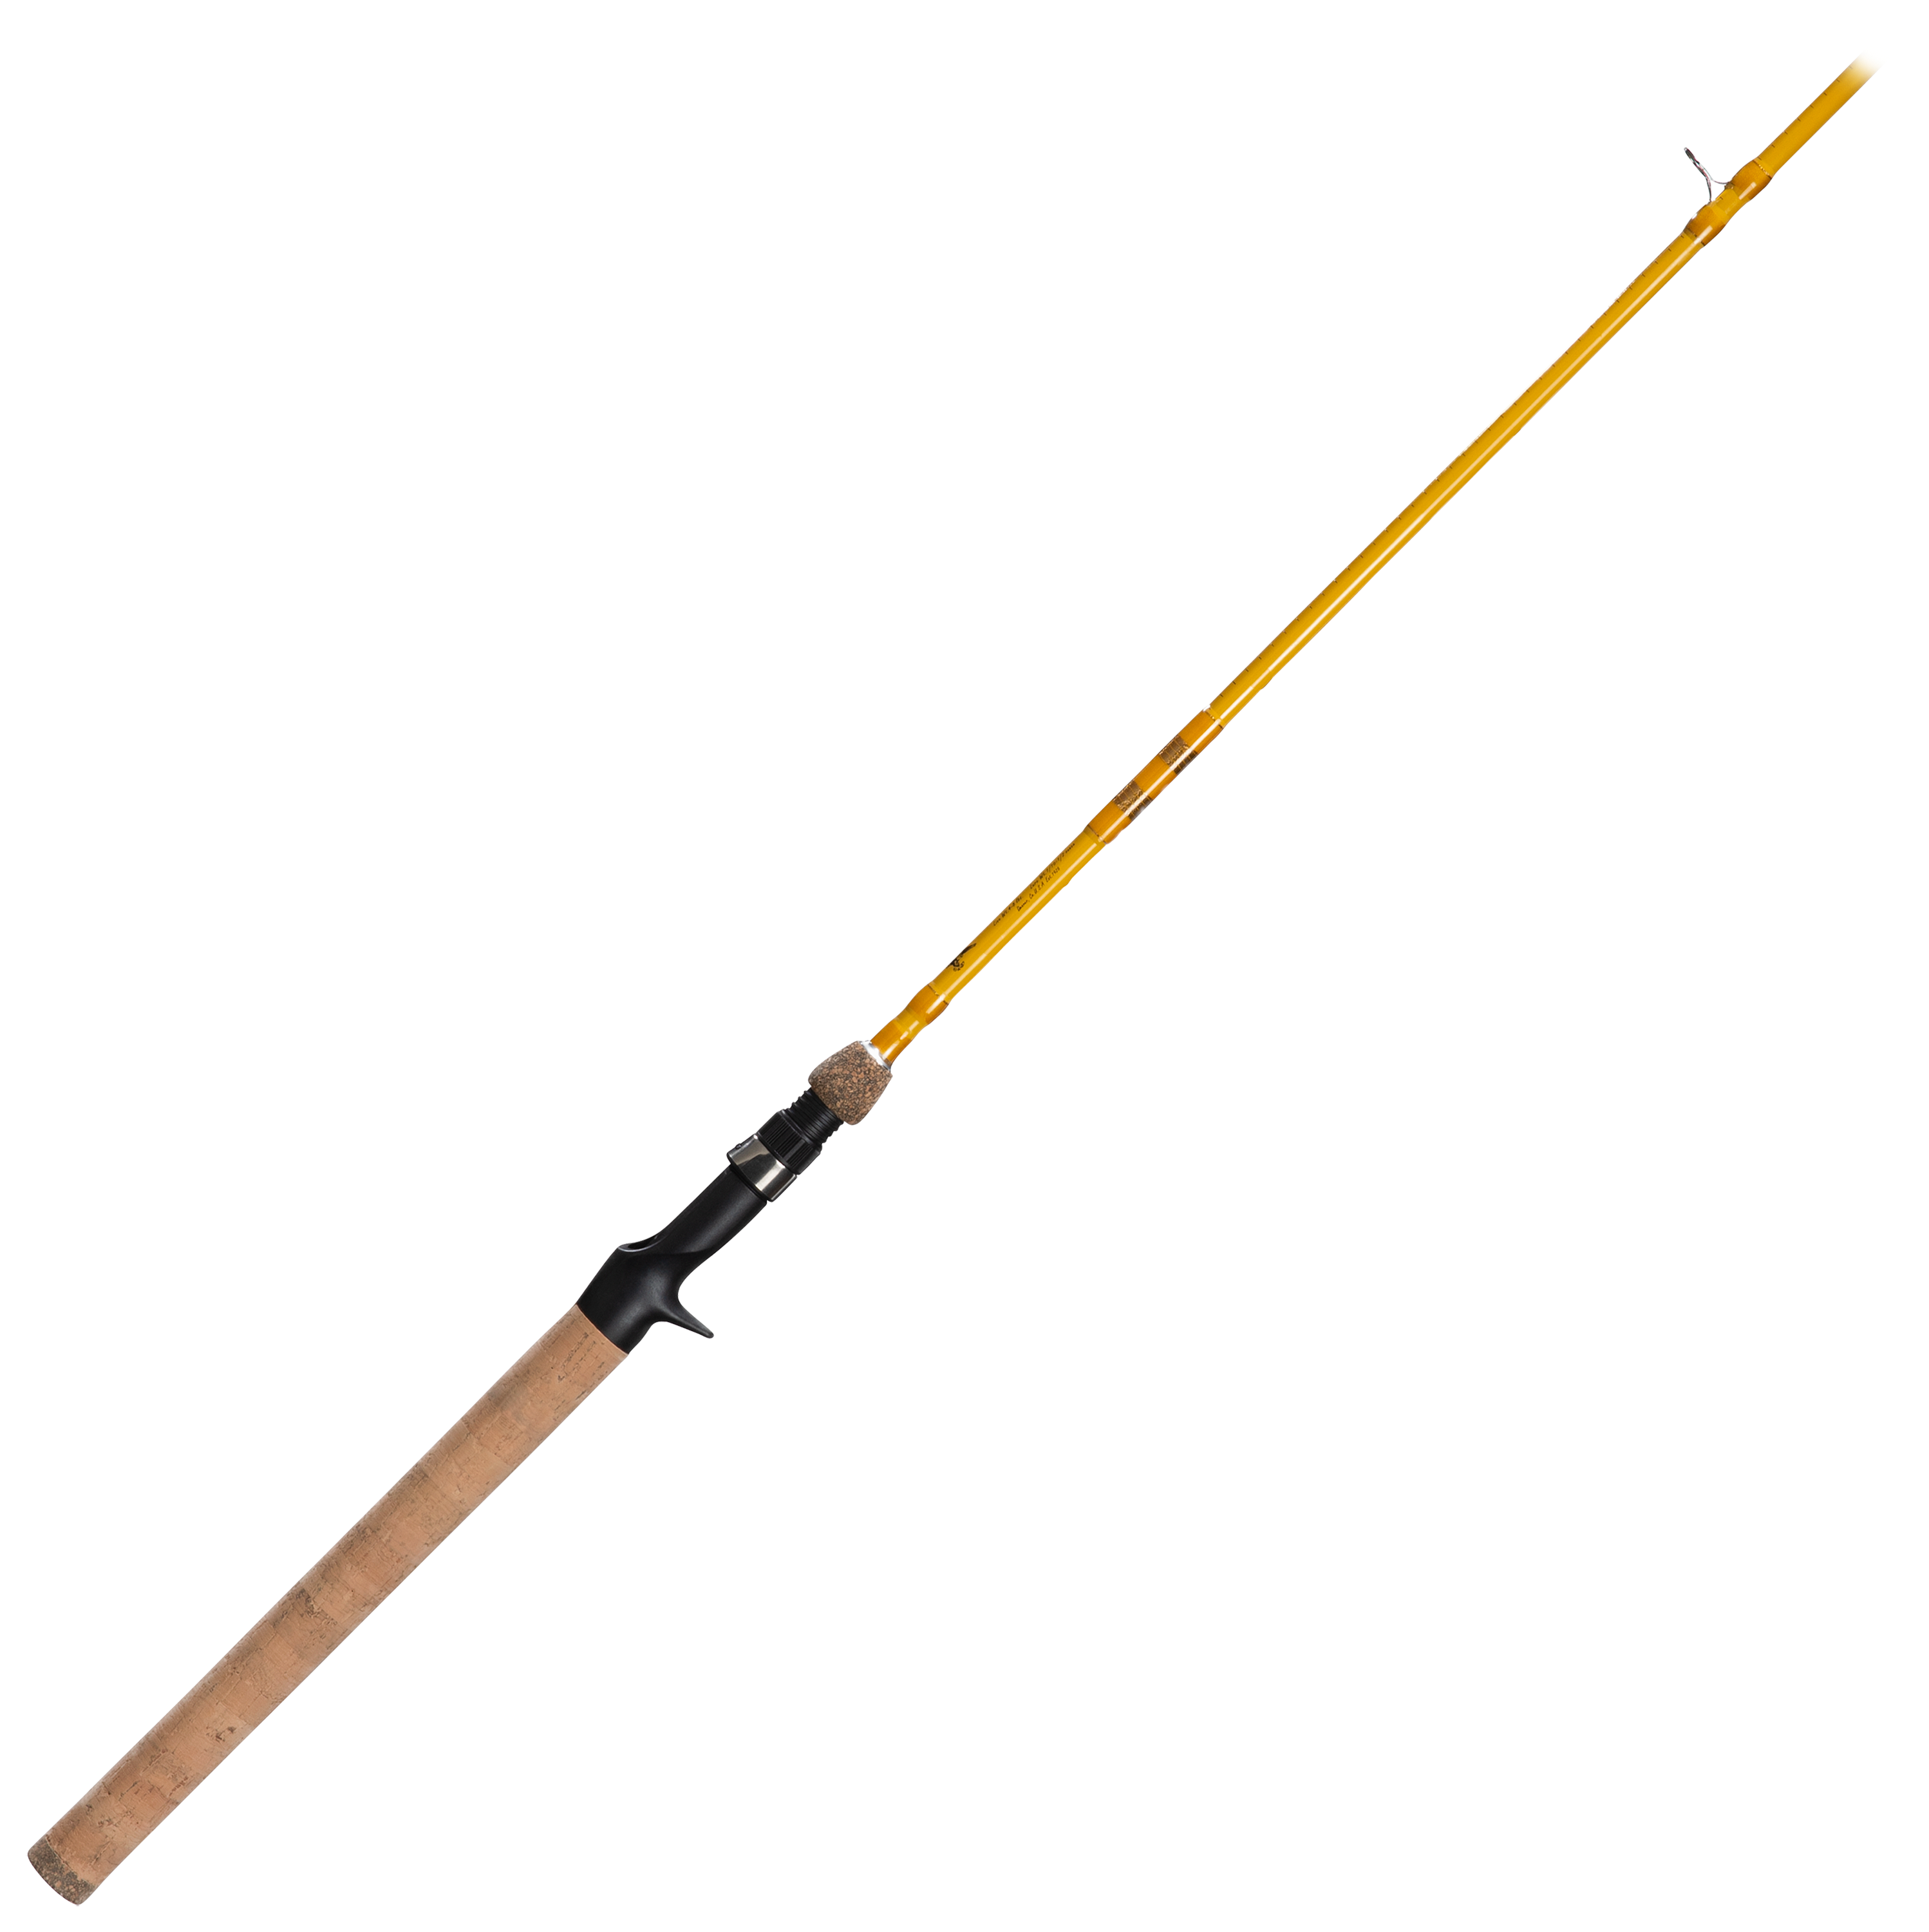 EAGLE CLAW Trailmaster Travel/Pack 8' 6 Fly Rod #TMM86F6 FREE US SHIP! 